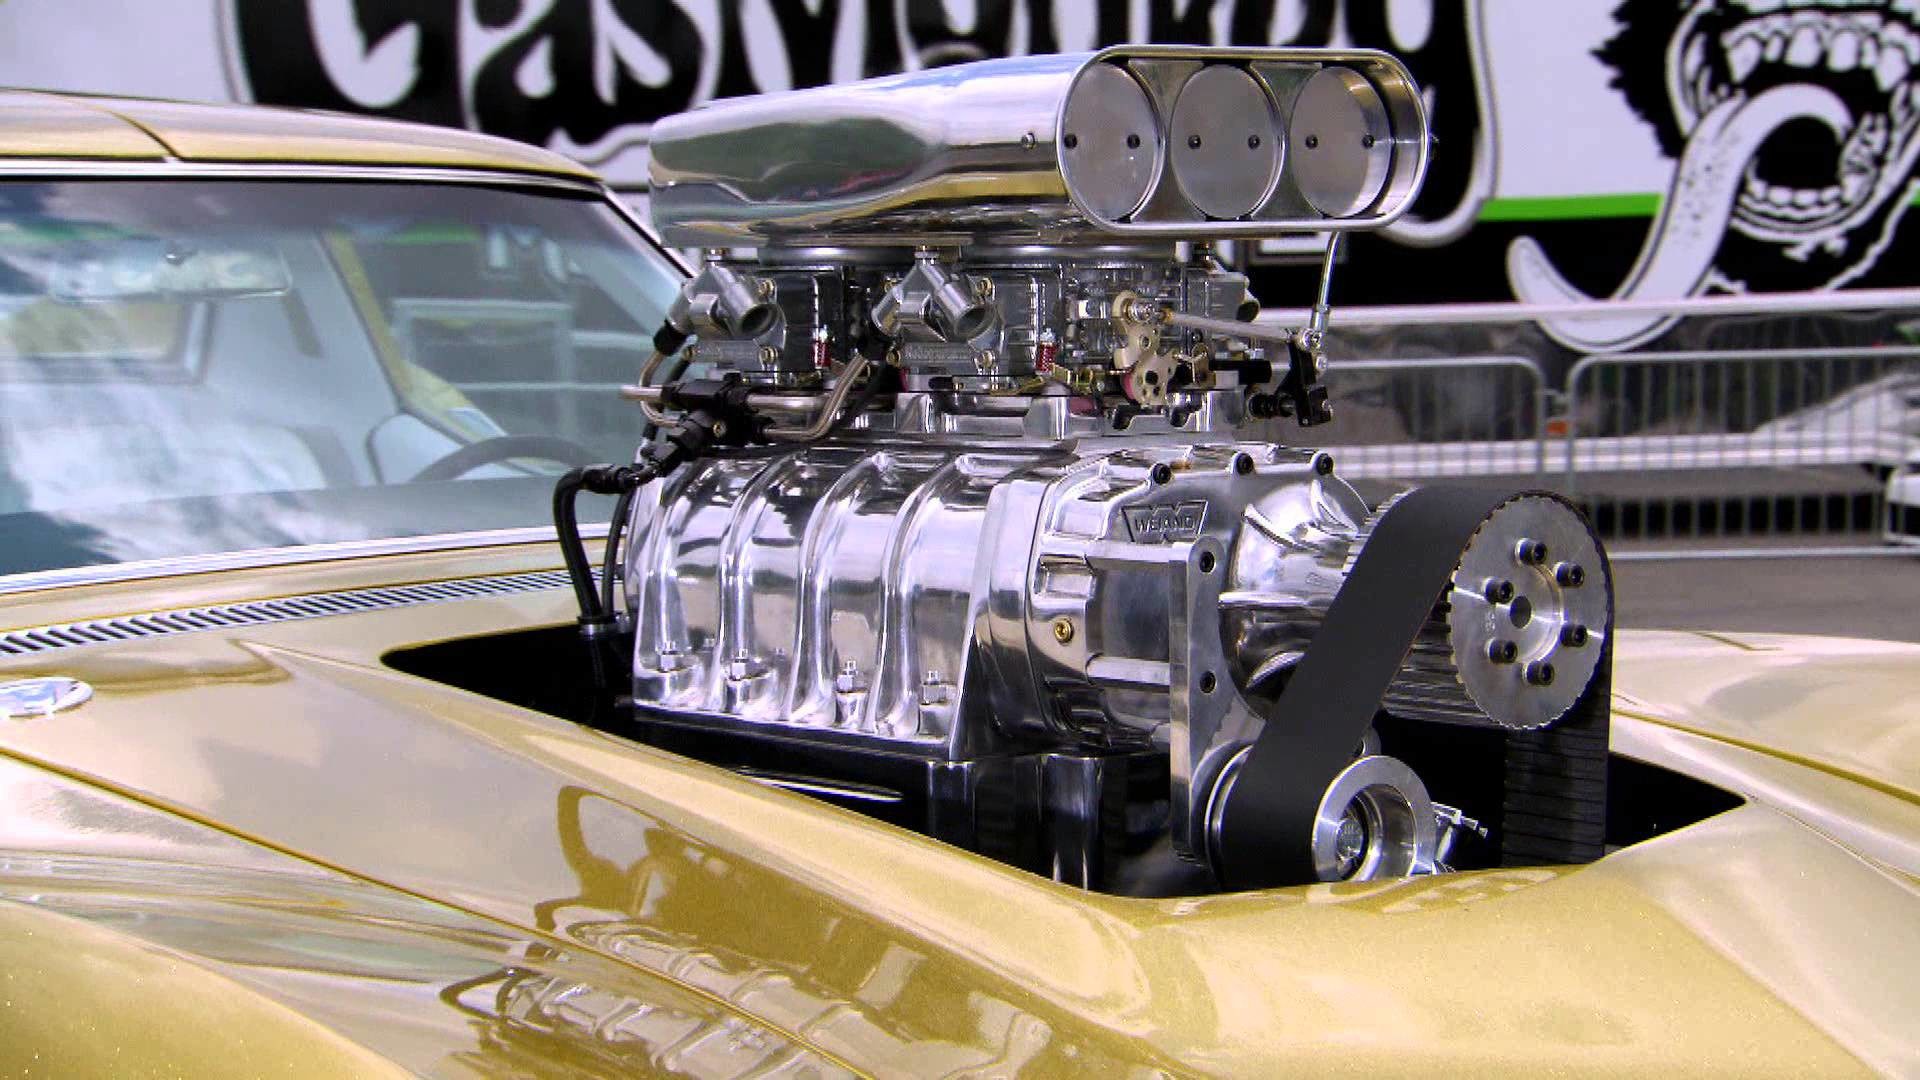 1920x1080 Back to the Beginning with Gas Monkey Garage - YouTube